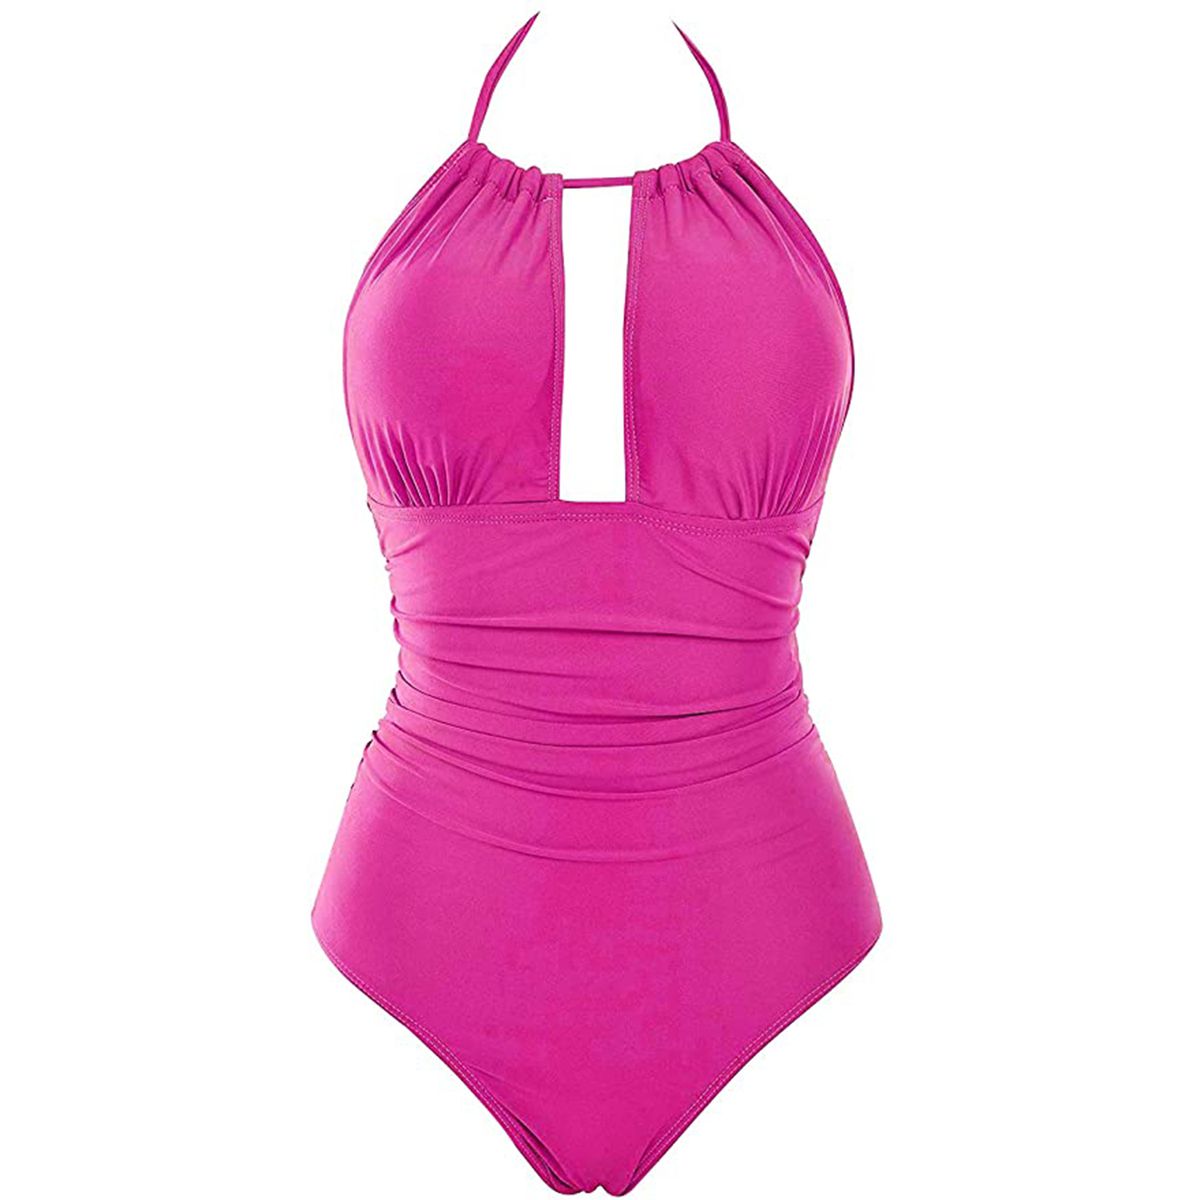 B2prity Women's Slimming One Piece Swimsuits Tummy Control Bathing Suit Halter Retro